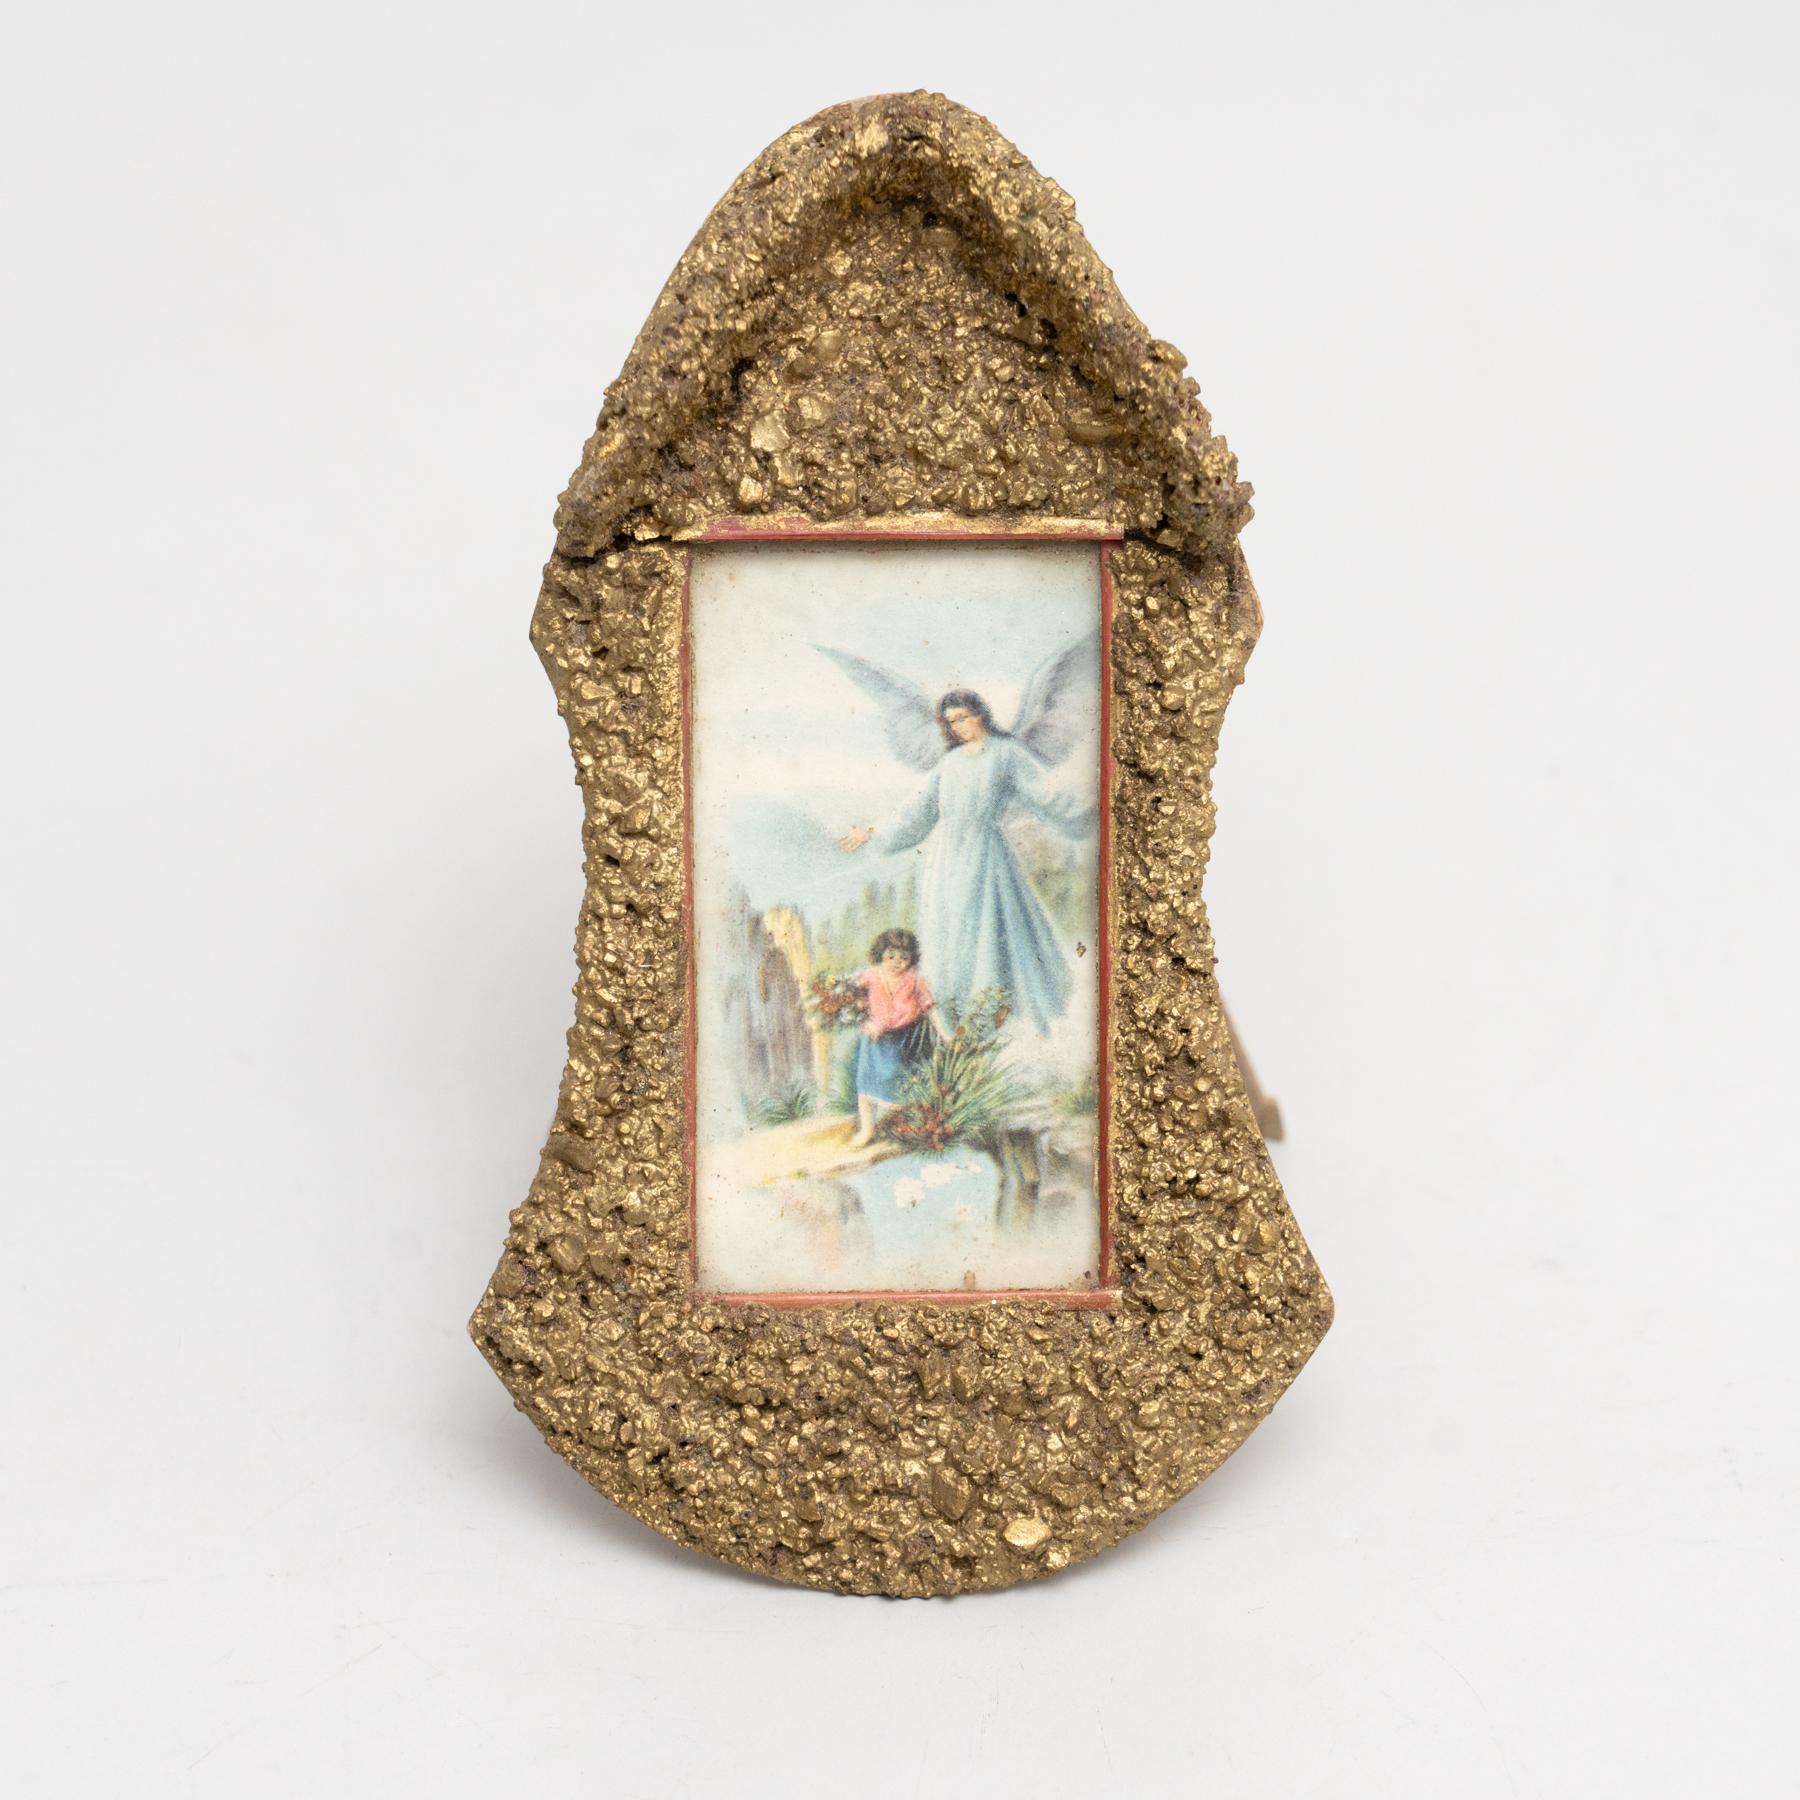 Mid-20th century traditional Spanish 'papier-mâché' framed Anunciation image. 
.
Made in Barcelona, Spain.

In original condition, with minor wear consistent with age and use, preserving a beautiful patina.

Materials:
Papier-Mâché.